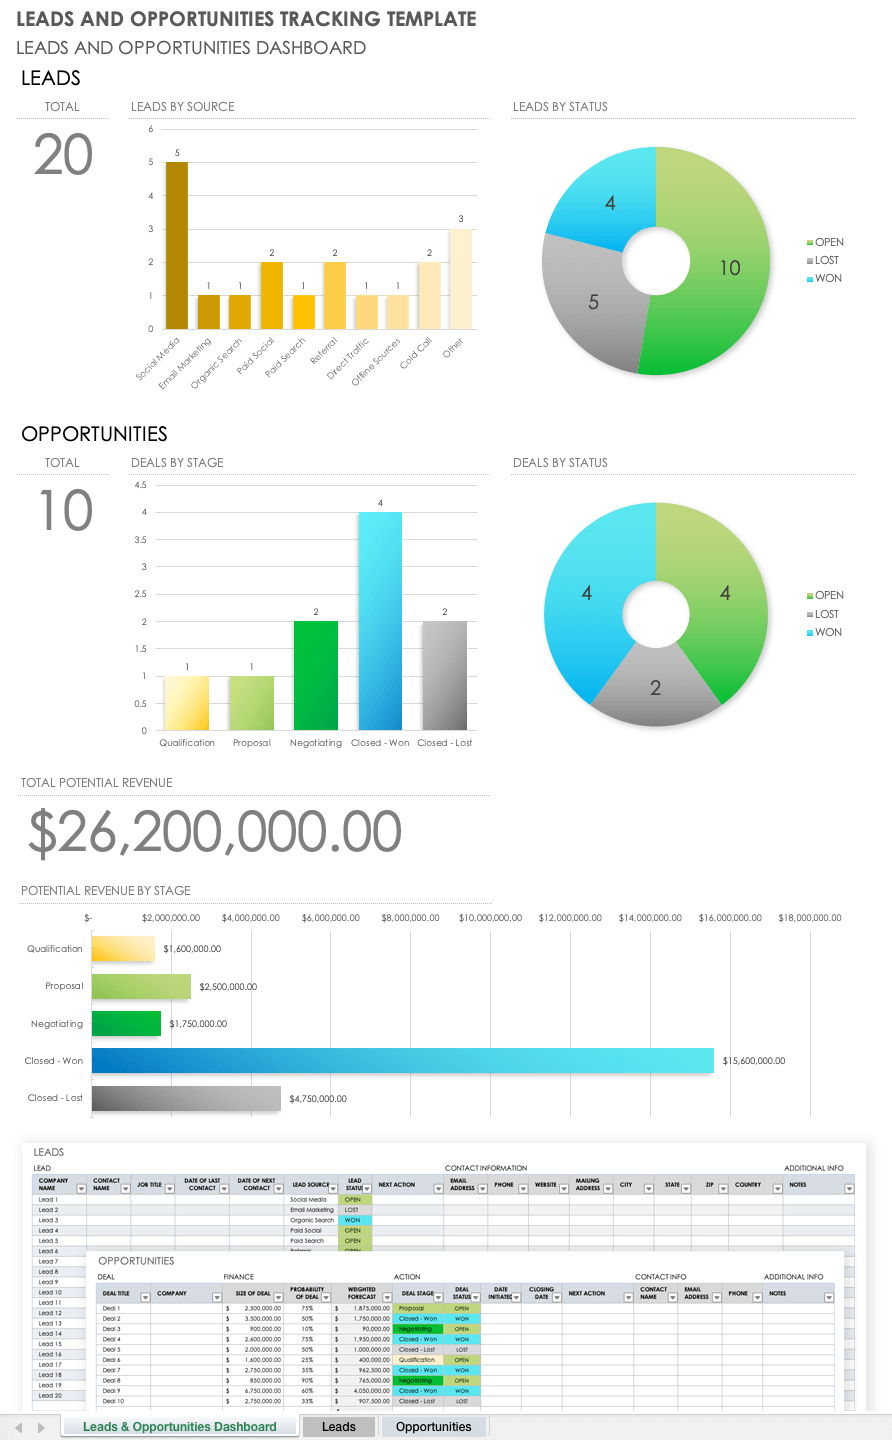 Leads and Opportunities Tracking Template